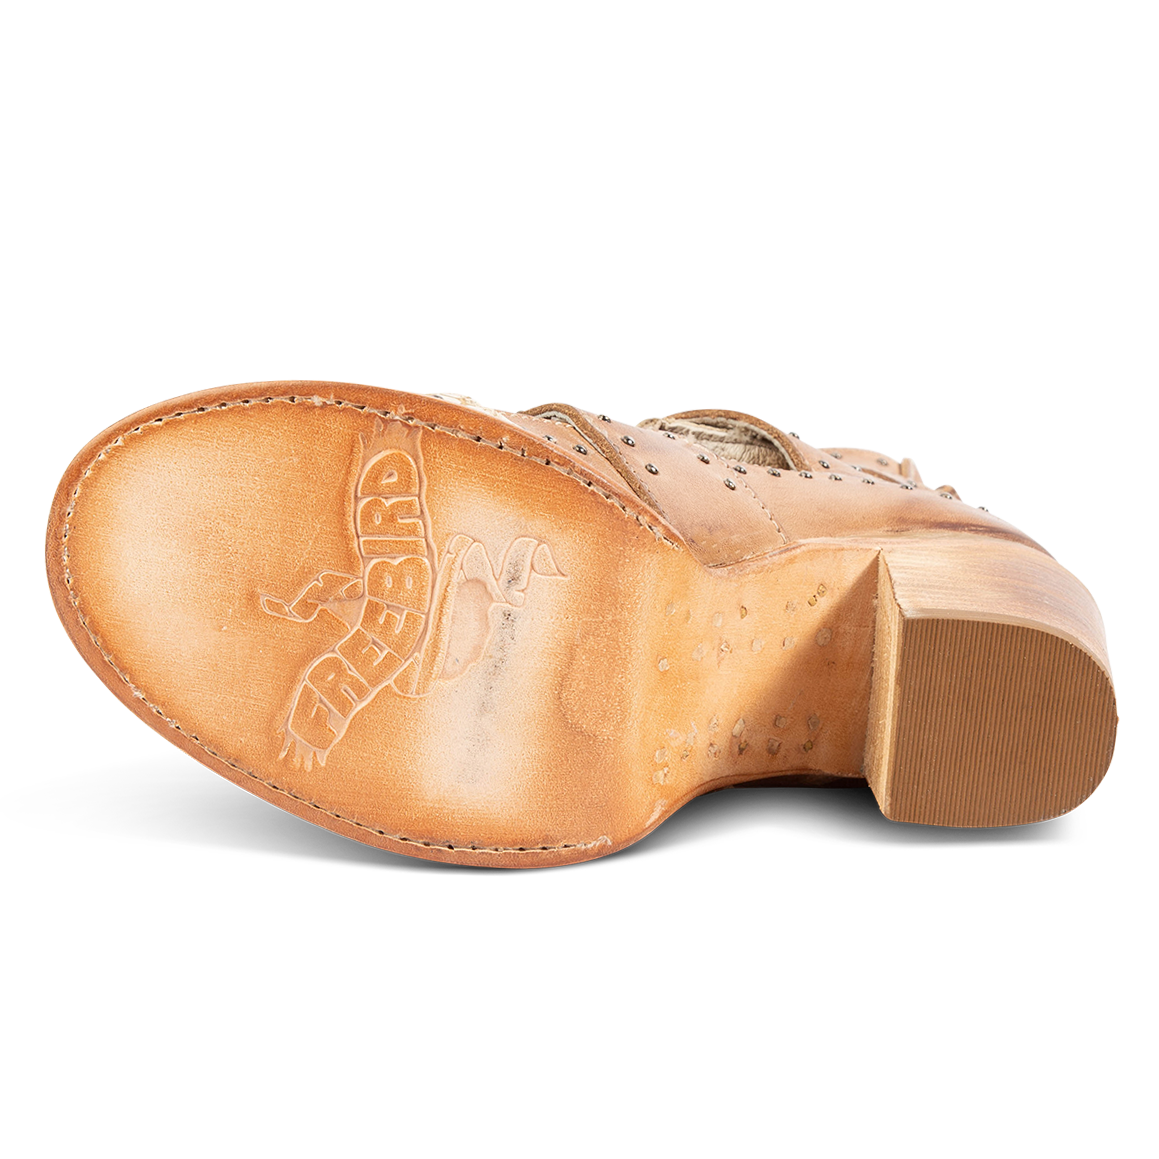 Leather sole imprinted with FREEBIRD on women's Brandy white snake embossed leather sandal